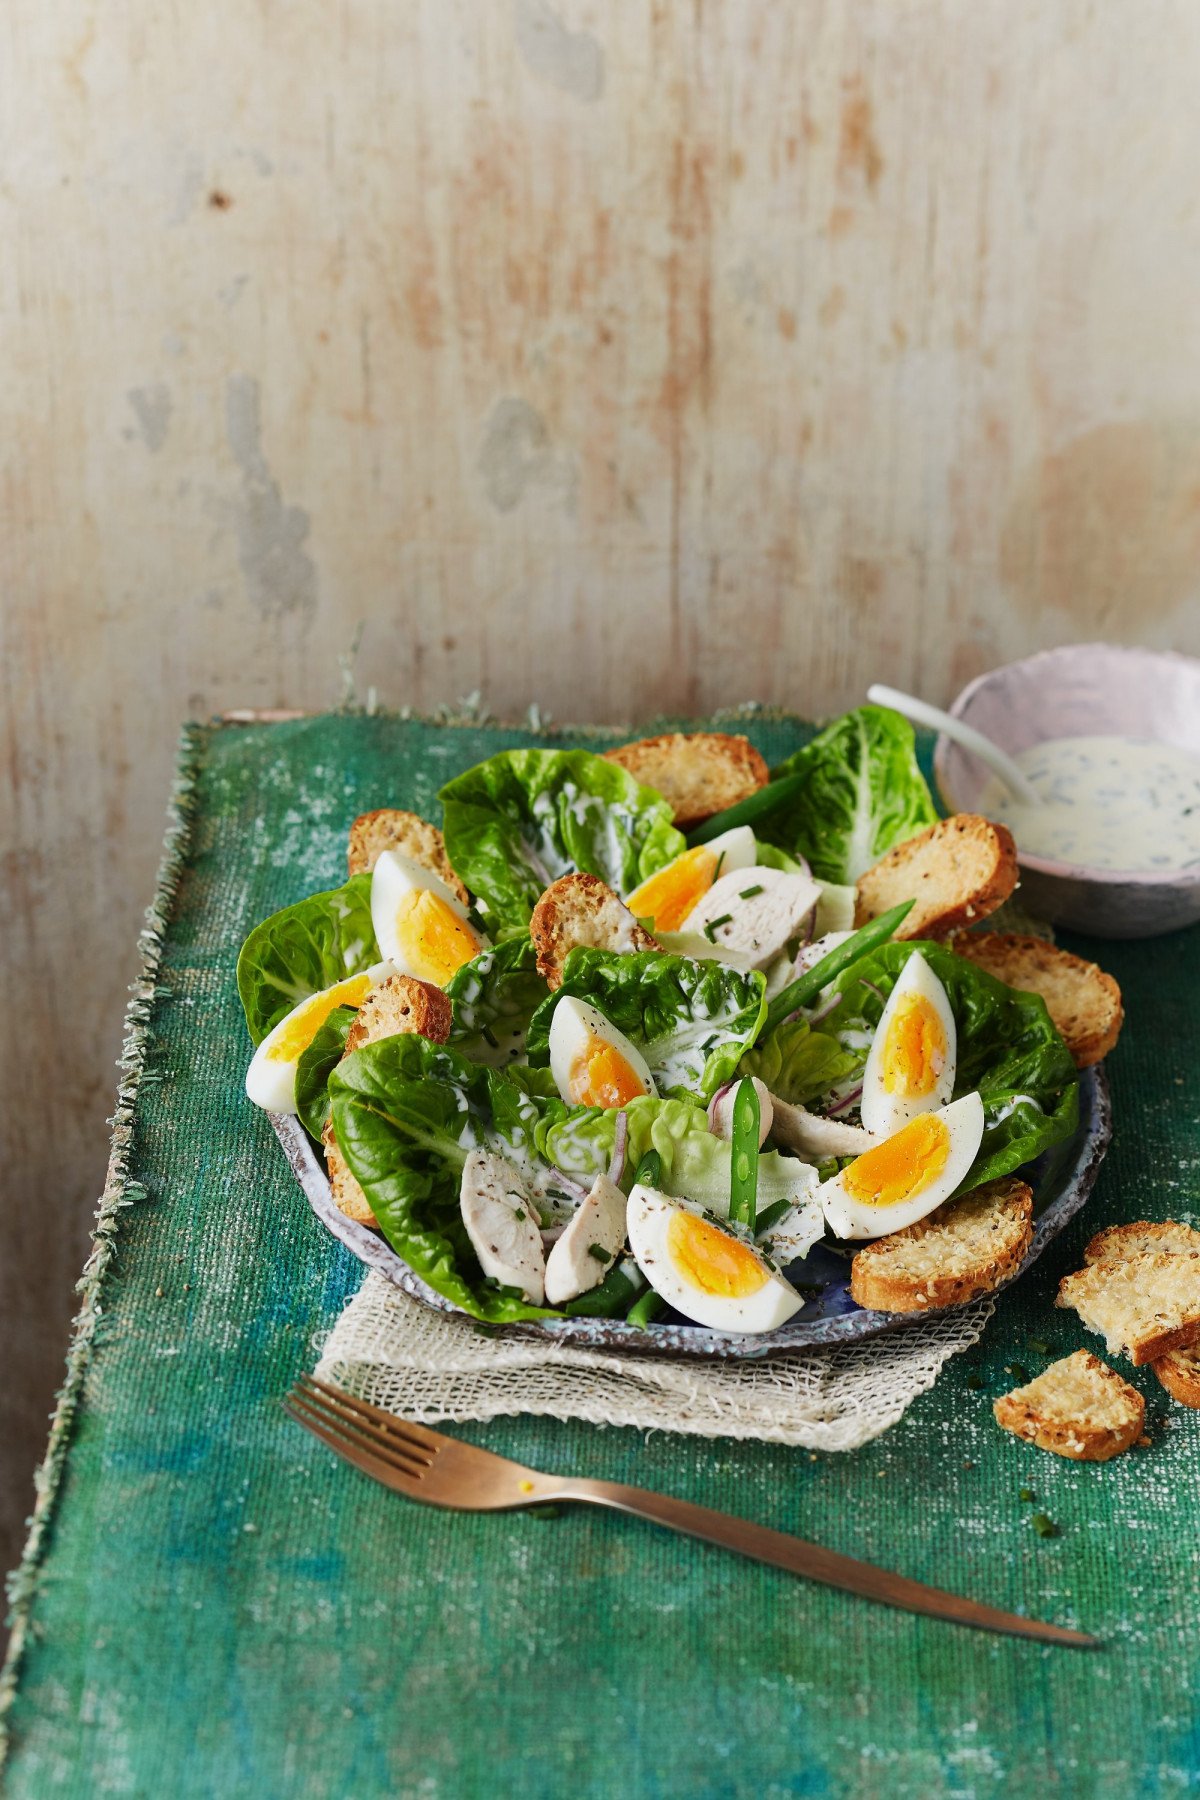 Egg and chicken ceasar salad